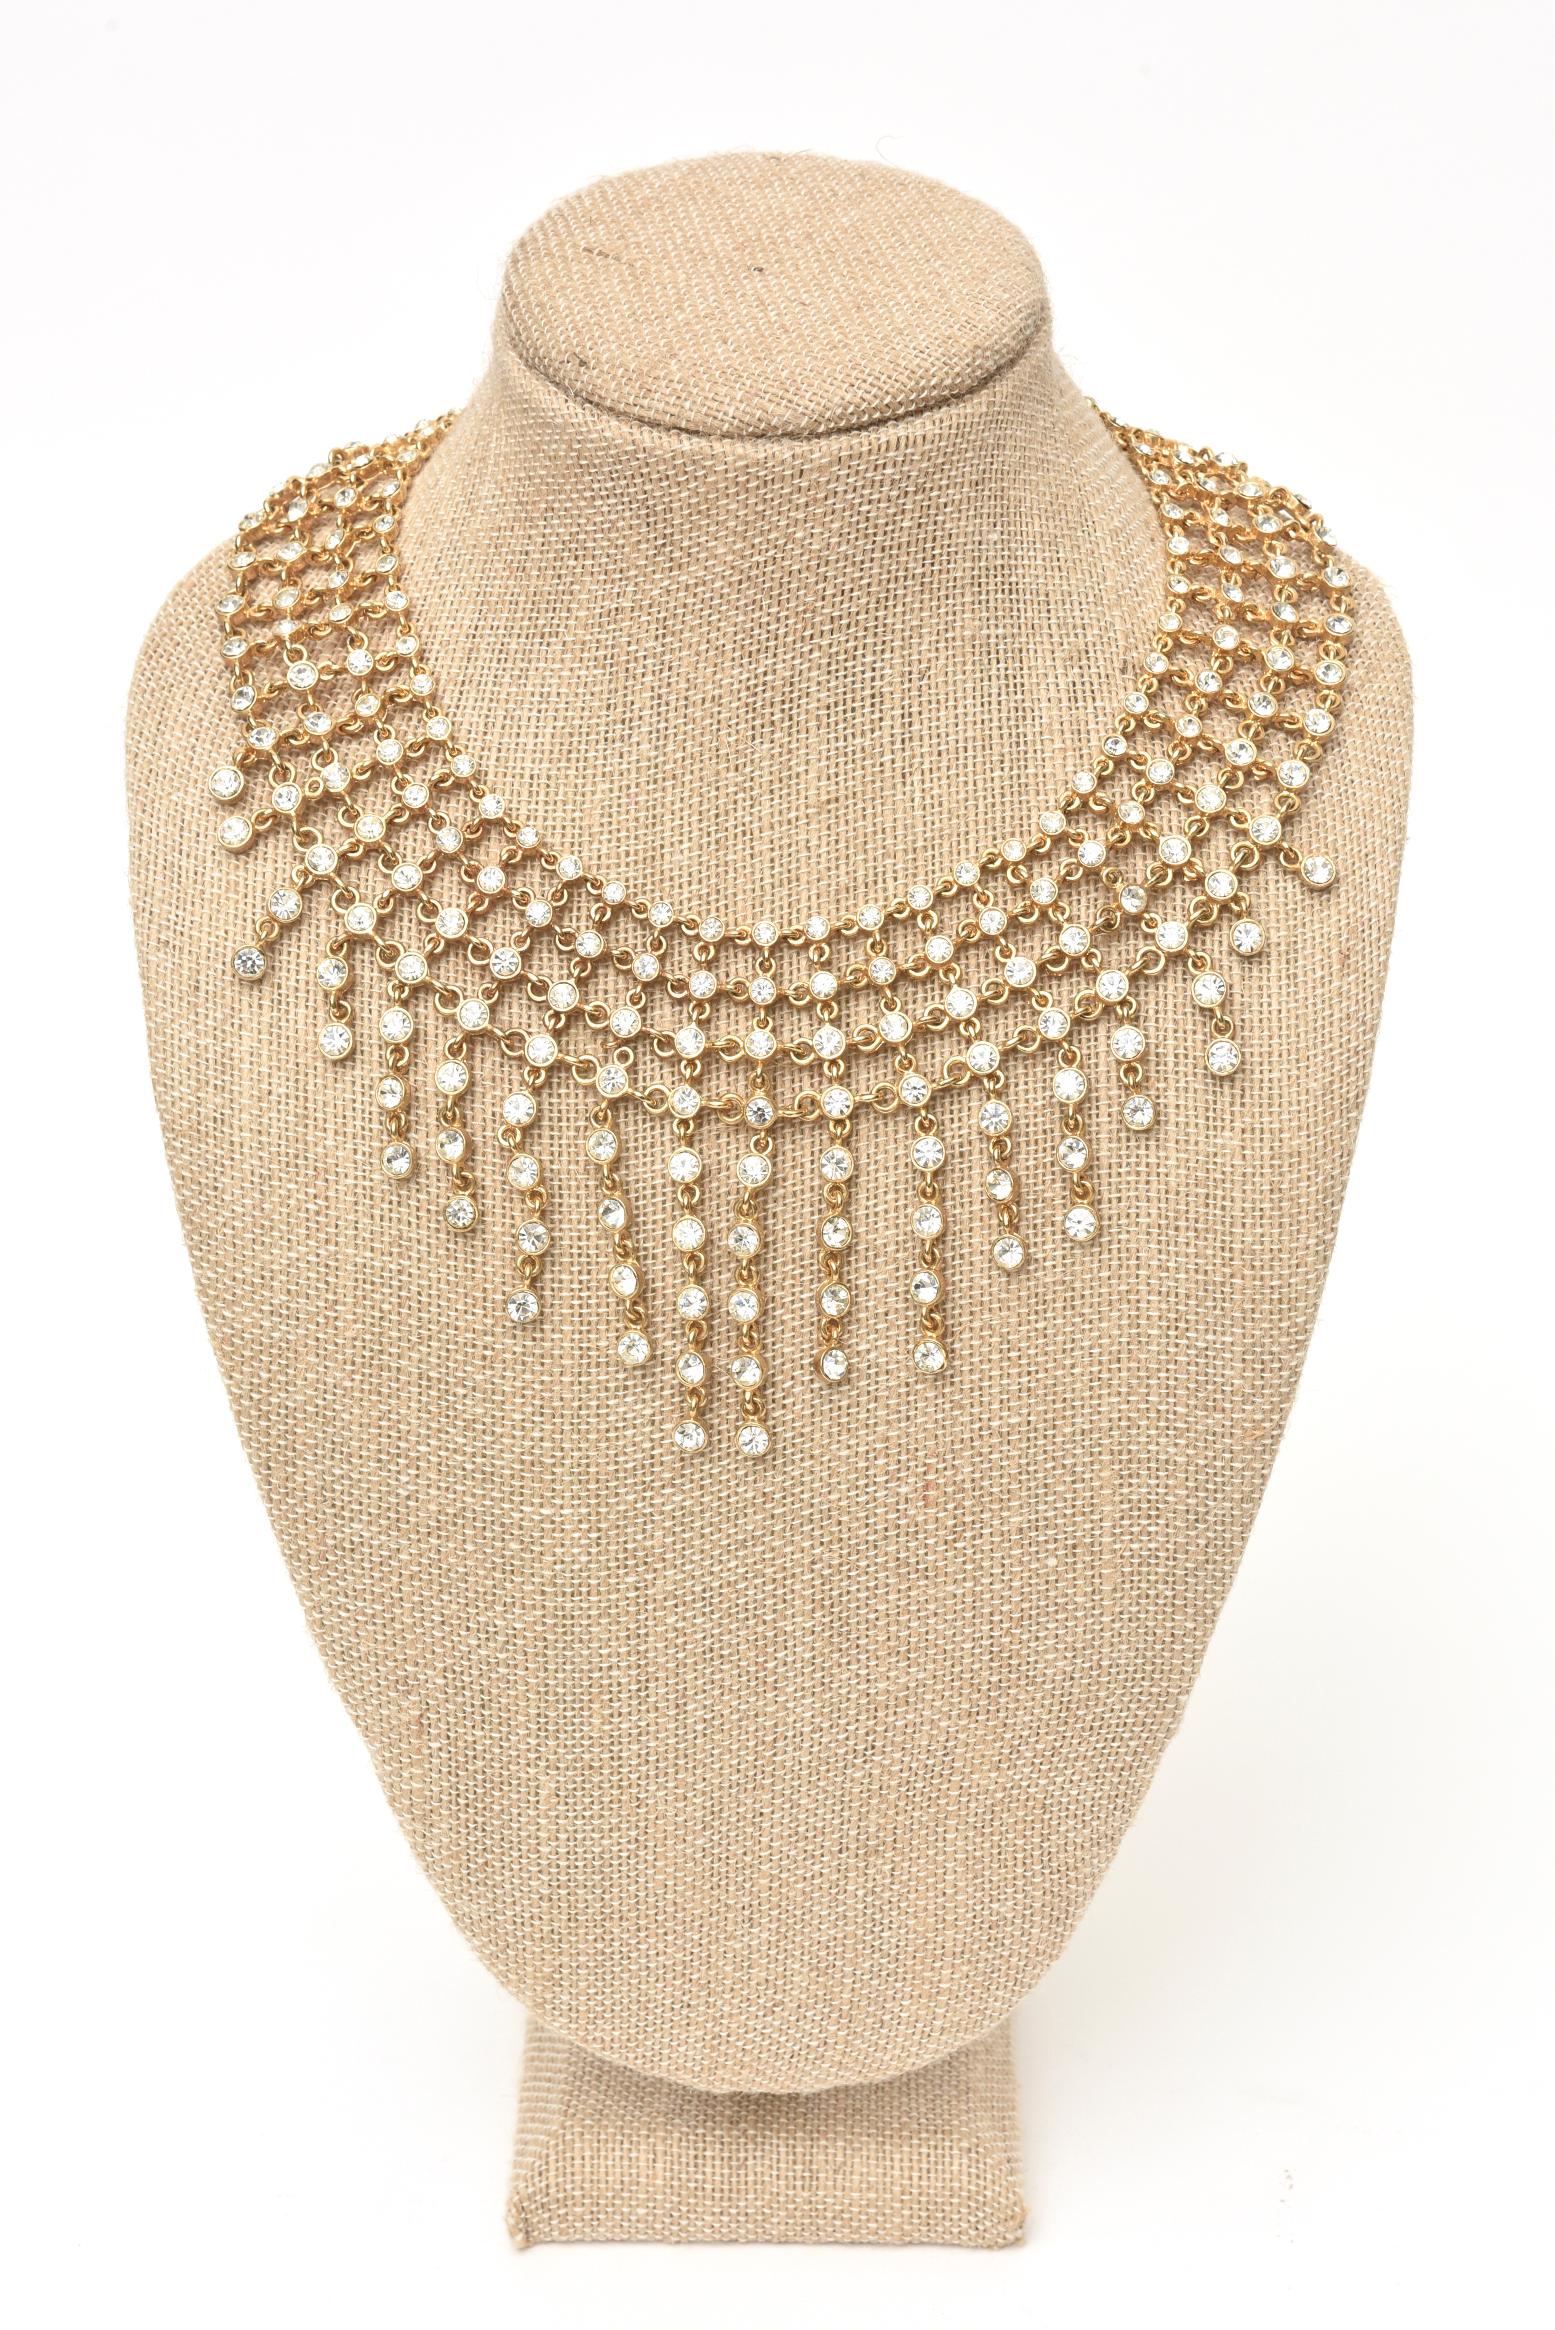  Rhinestone and Gilded Metal Bib Necklace Vintage For Sale 2